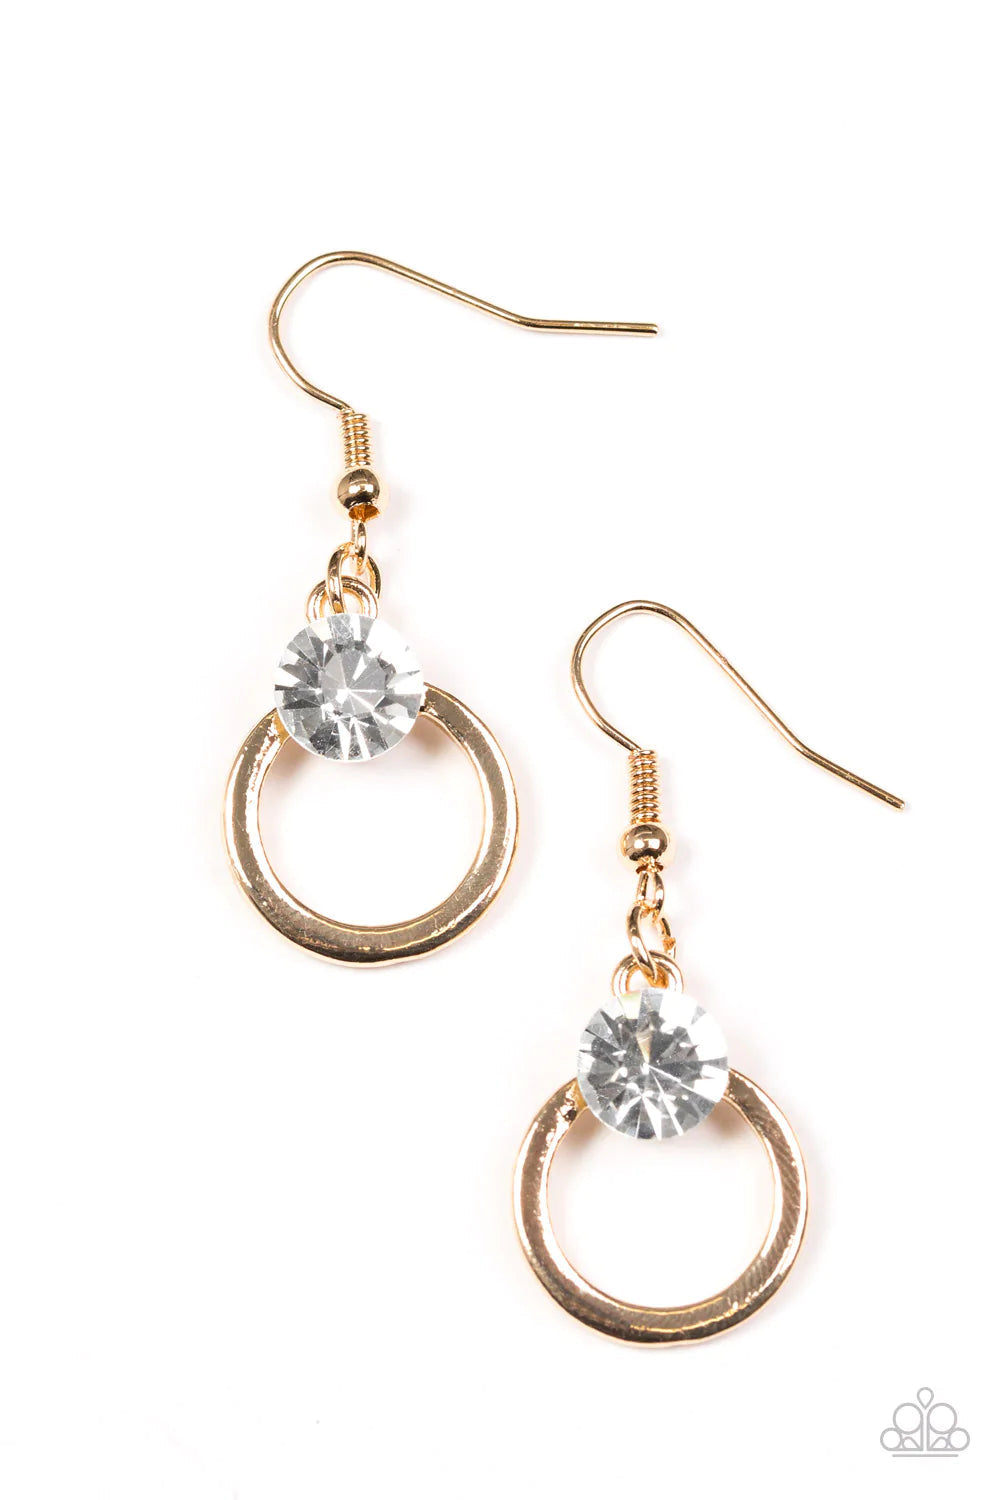 Paparazzi Accessories  - Fame On #L18 - Gold Earrings